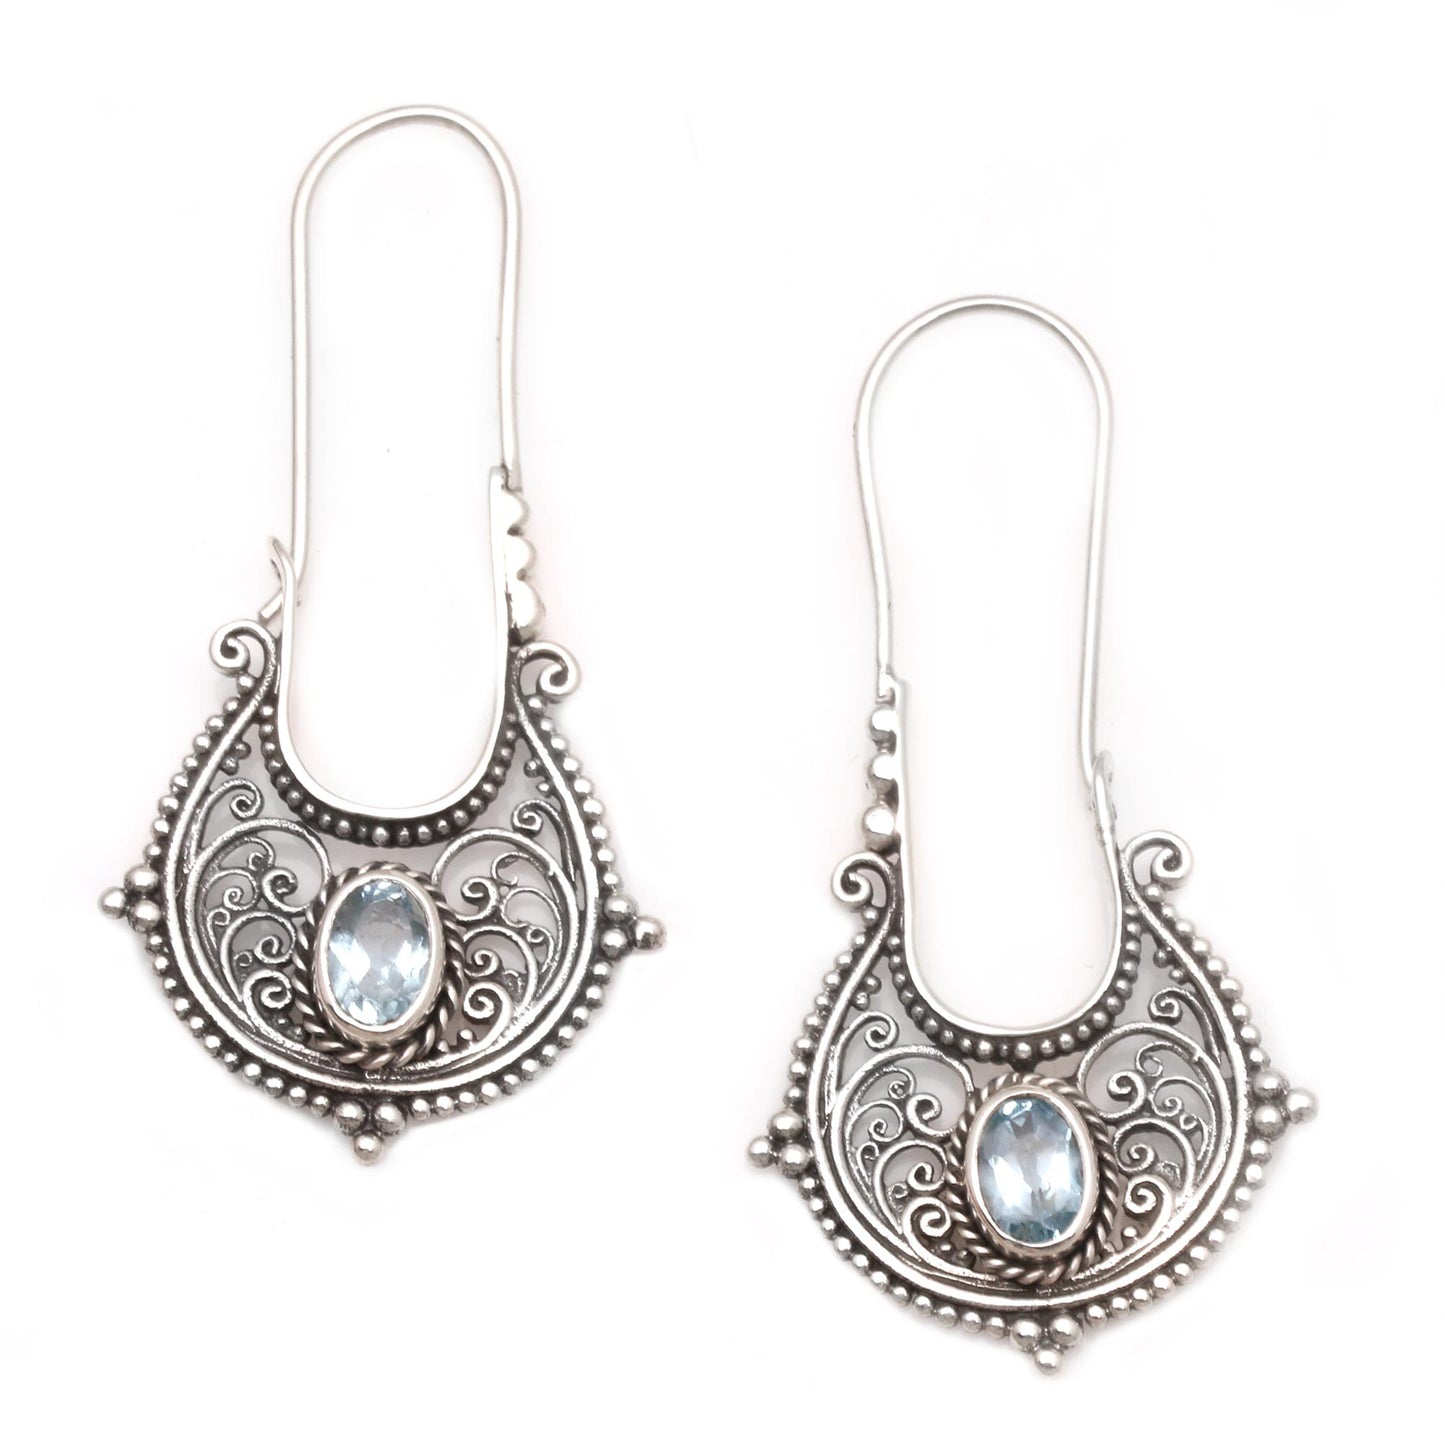 Fortunate Twist Blue Topaz and Sterling Silver Drop Earrings